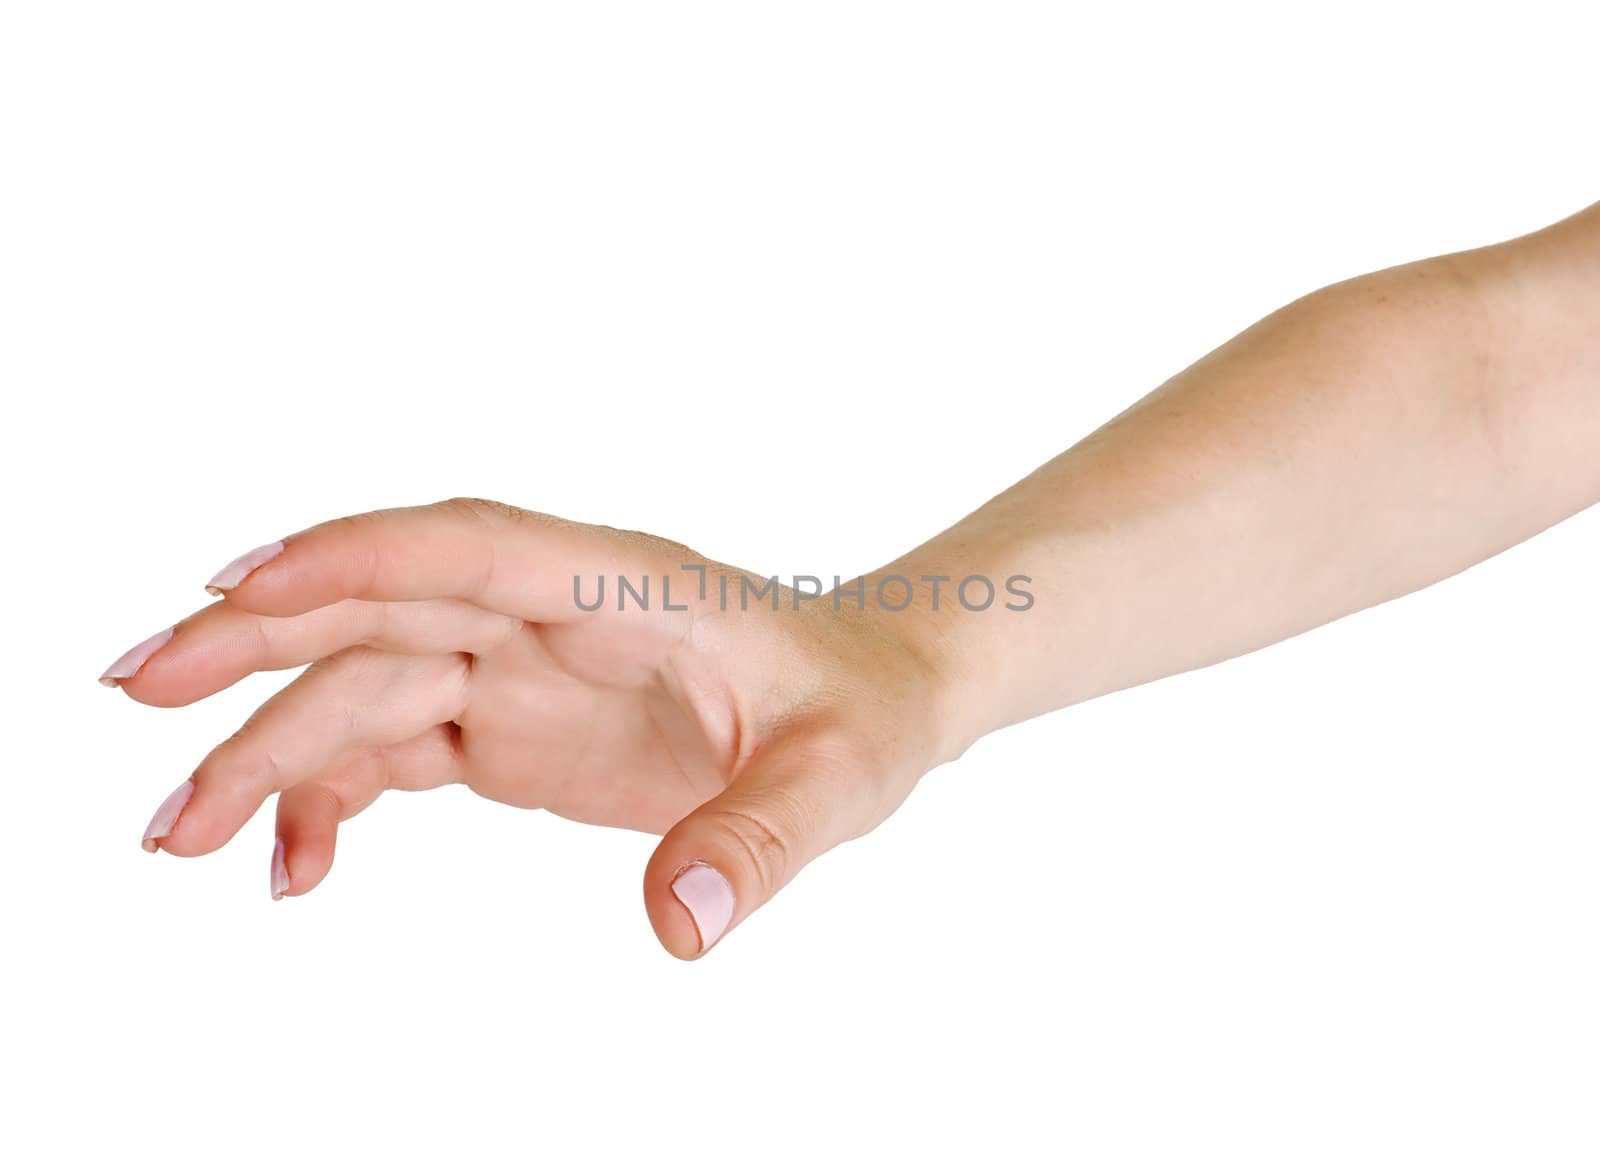 Female hand photographed on a white background